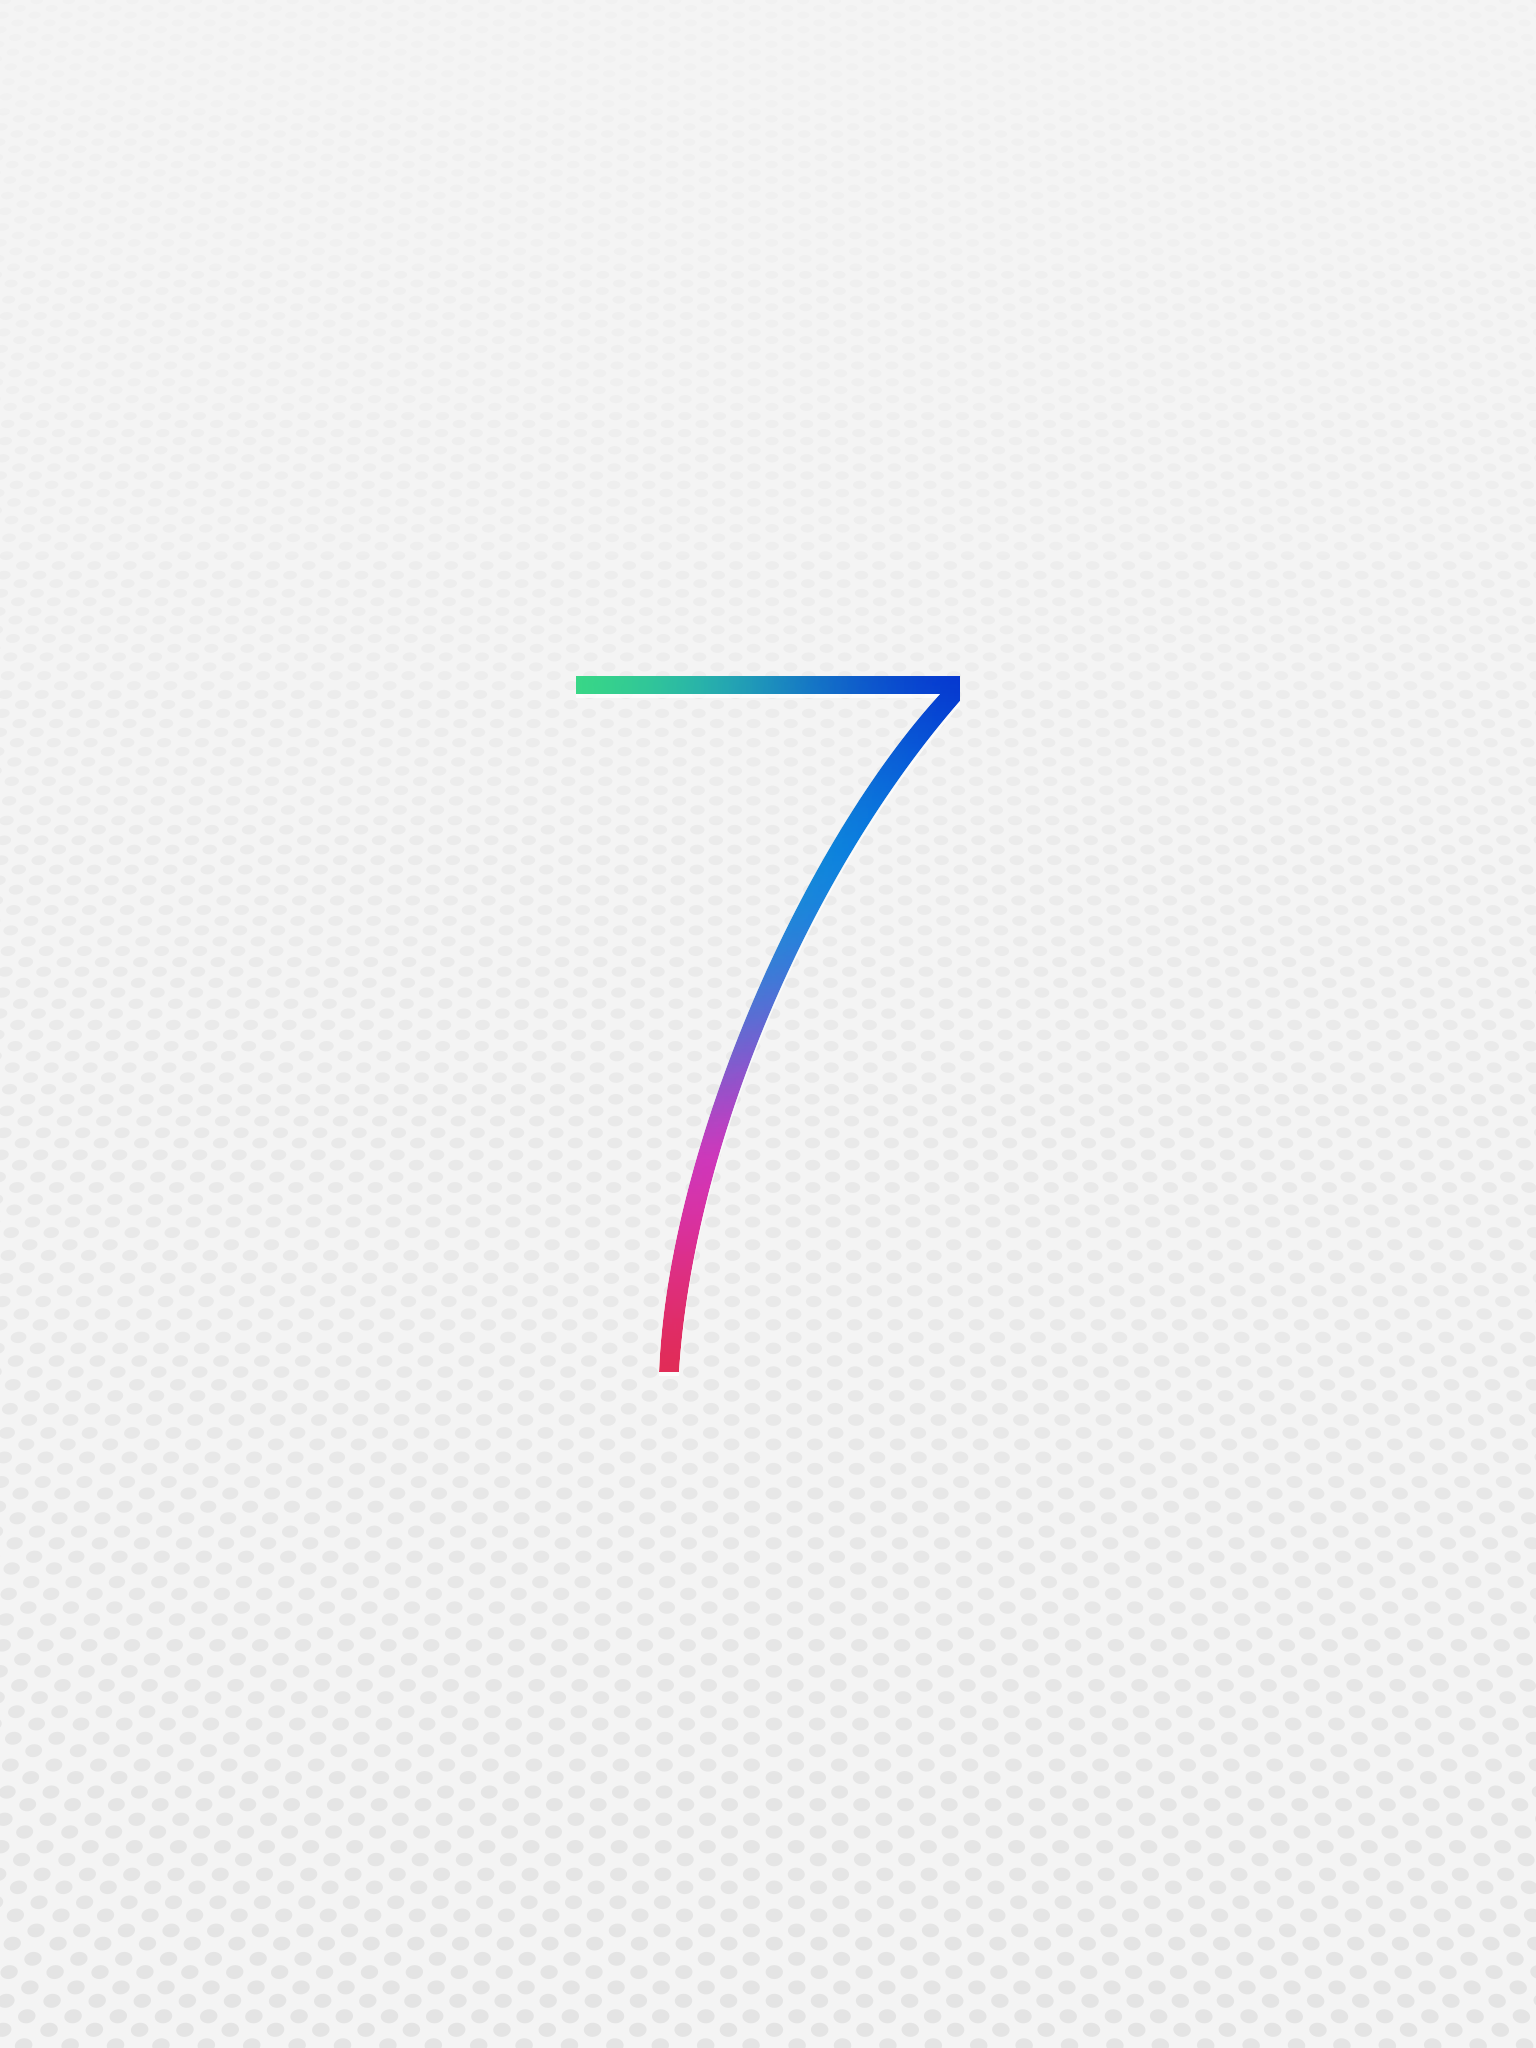 Free download Download iOS 7 Logo Wallpaper for iDevices